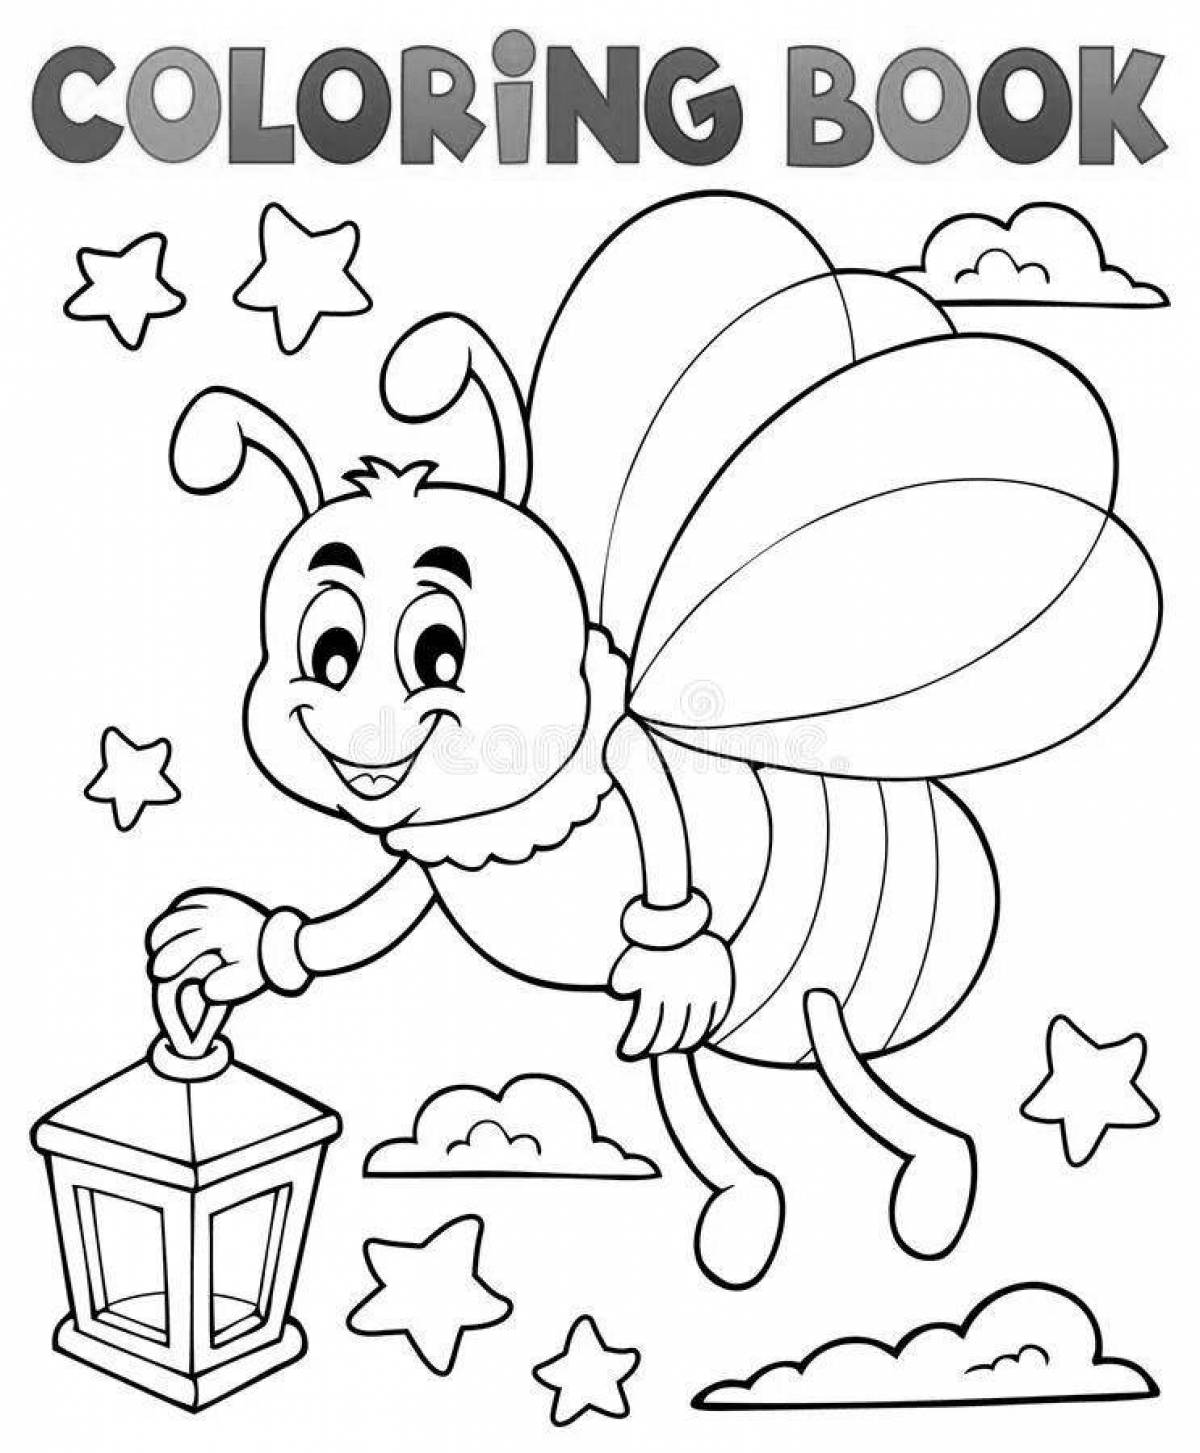 Vibrant firefly coloring page